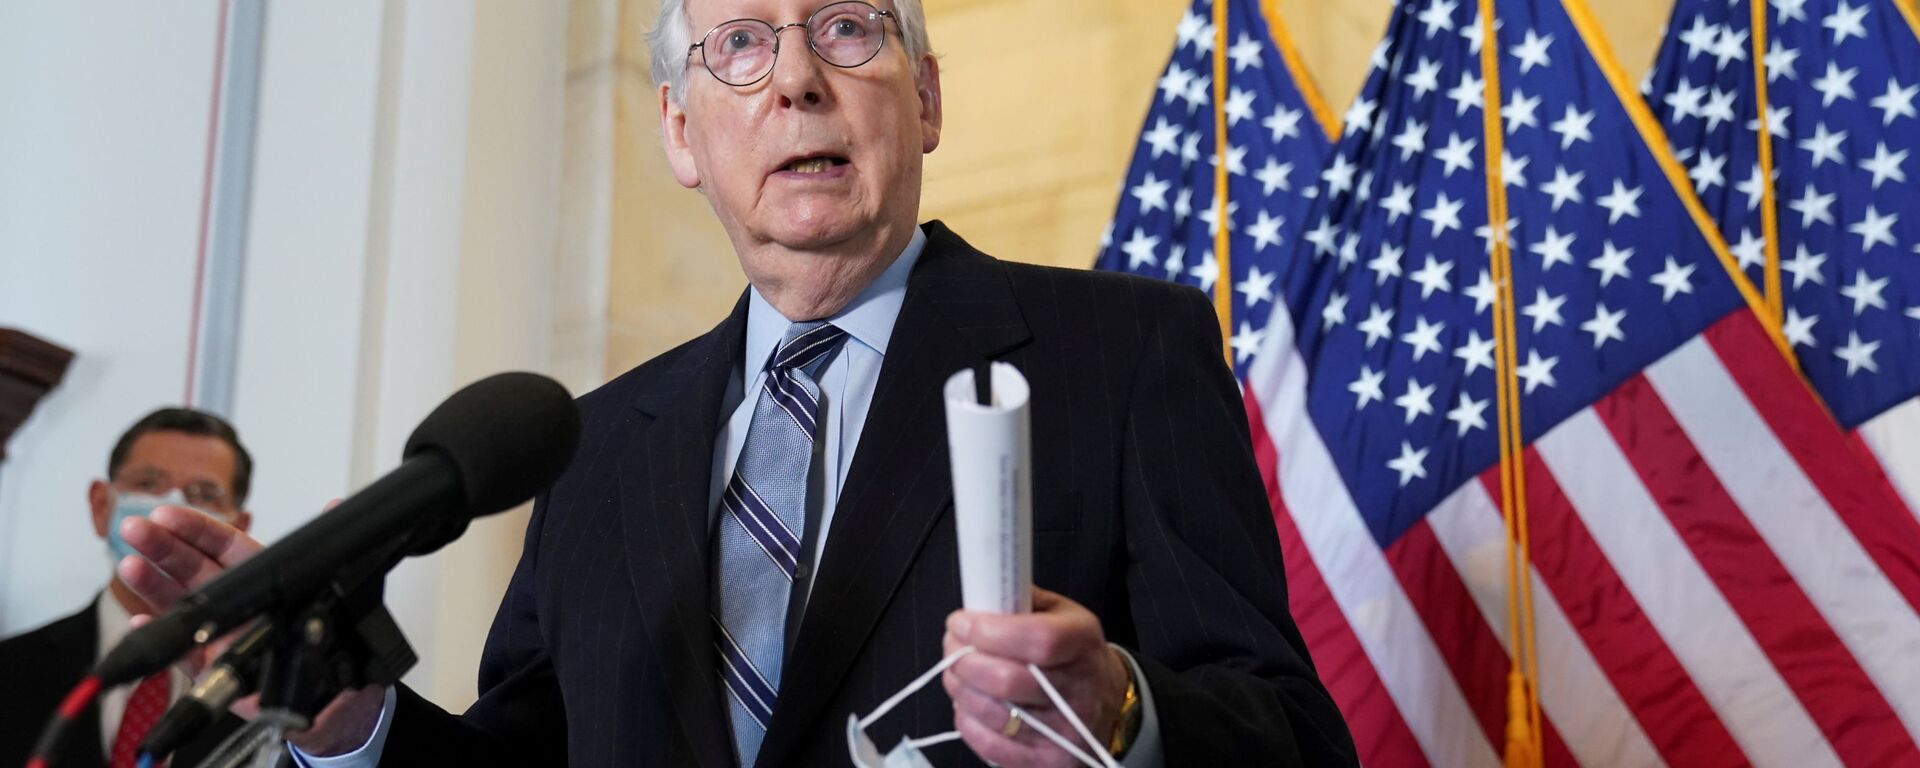 Senate Minority Leader Mitch McConnell speaks to reporters after the Senate Republican lunch on Capitol Hill in Washington, U.S., March 23, 2021 - Sputnik International, 1920, 08.11.2021